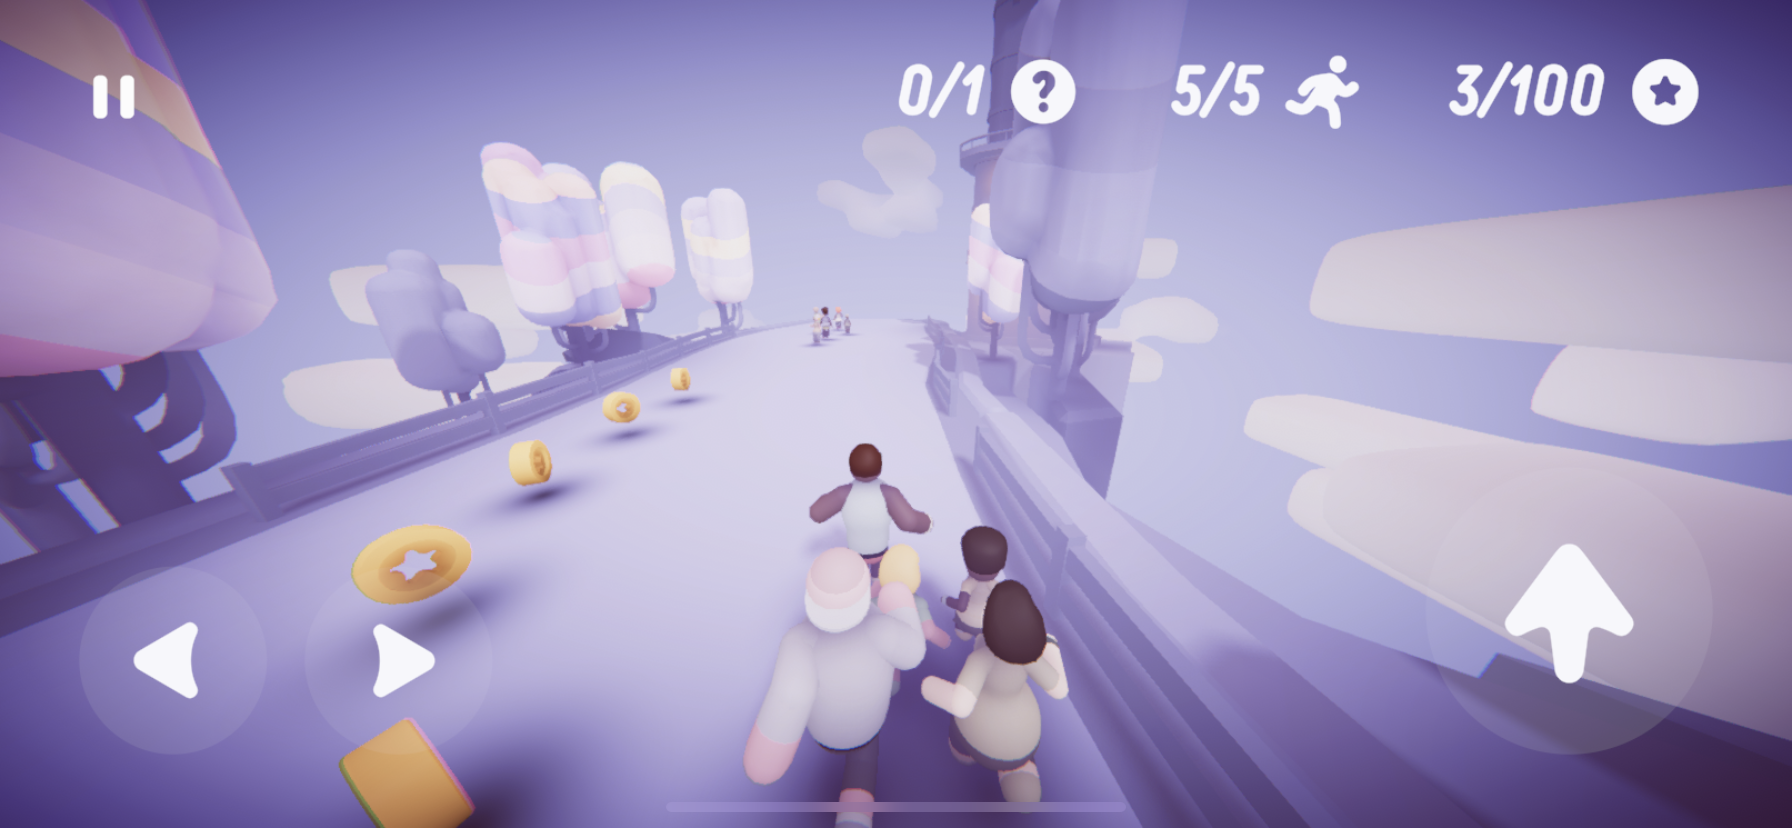 Crowd Control Runner ‘Populus Run’ from FIFTYTWO Is Out Now as This Week’s New Apple Arcade Release